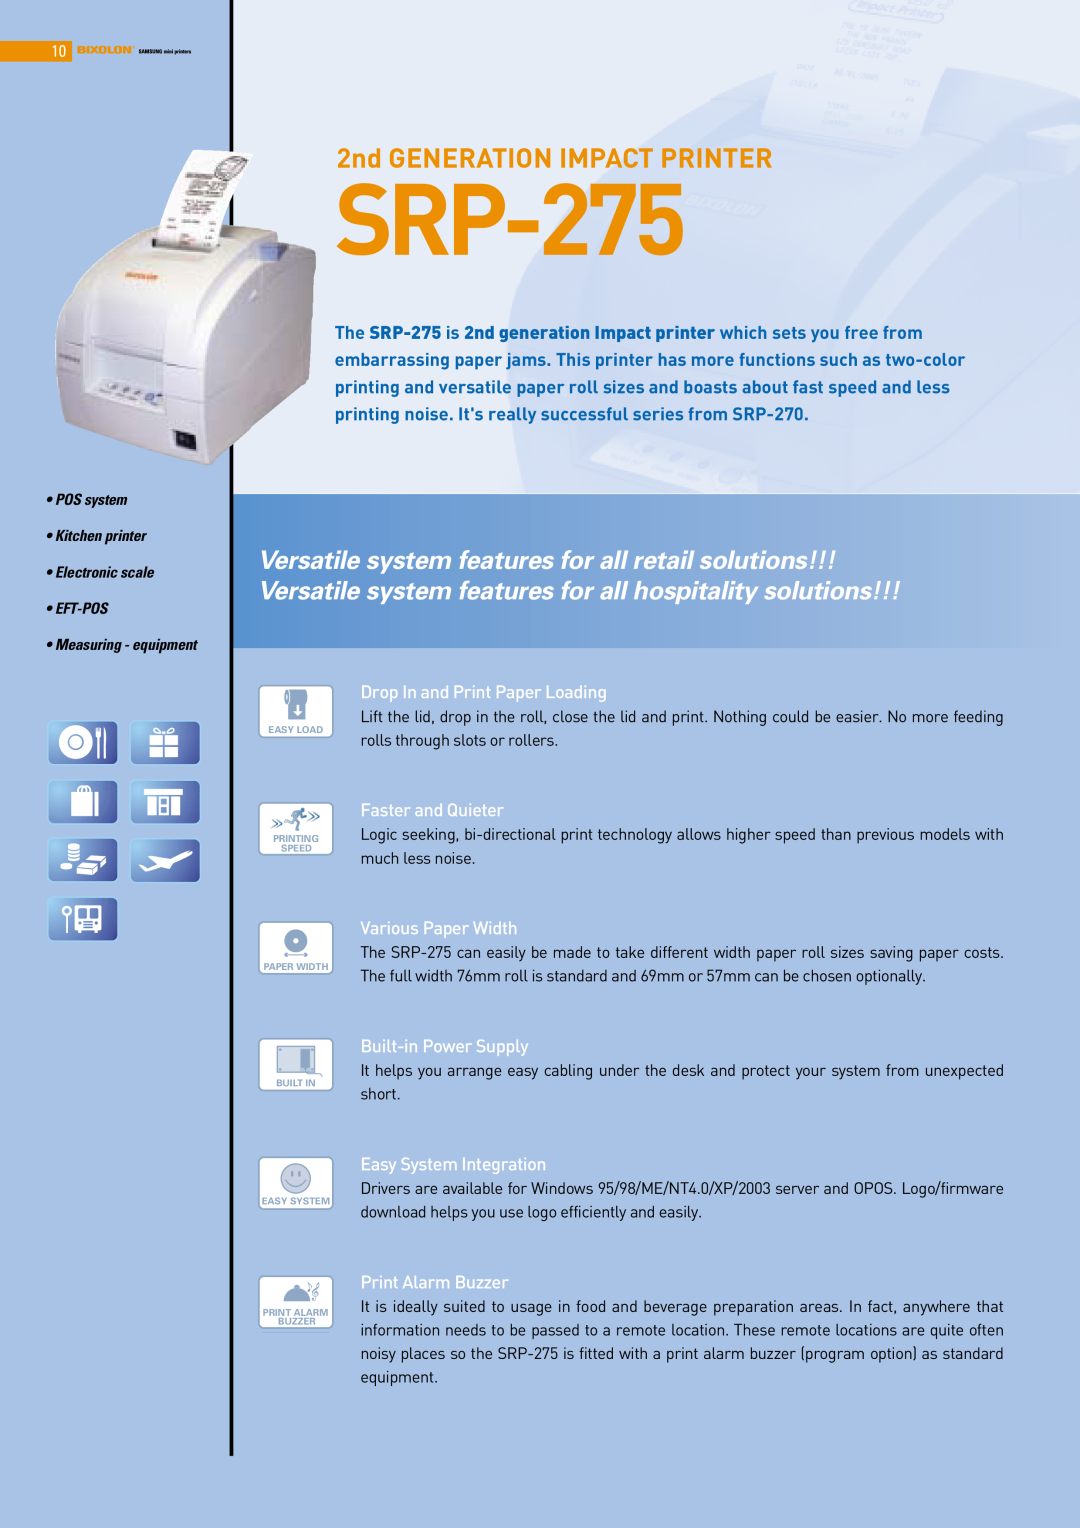 Samsung SRP-372, SRP-370 SRP-275, 2nd GENERATION IMPACT PRINTER, Thermal Receipt Printer, Drop In and Print Paper Loading 